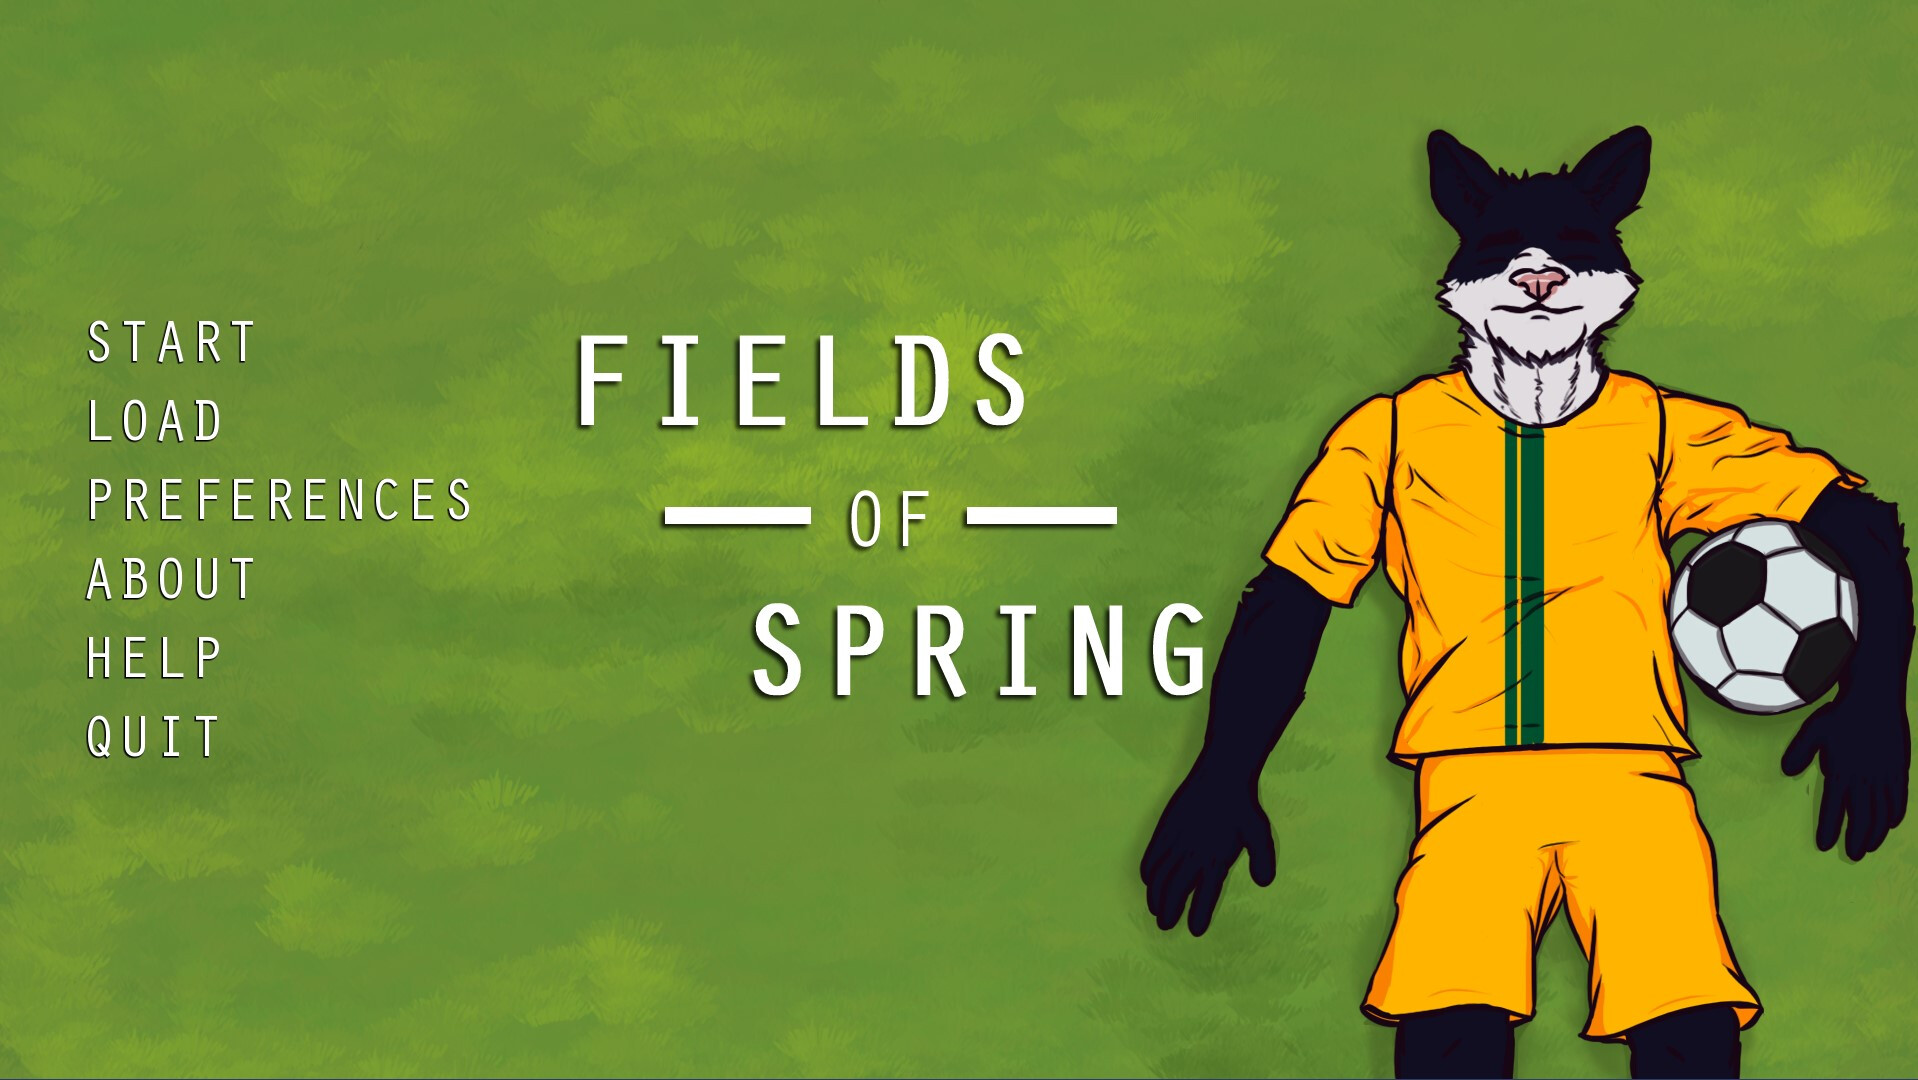 Fields of Spring Main Image